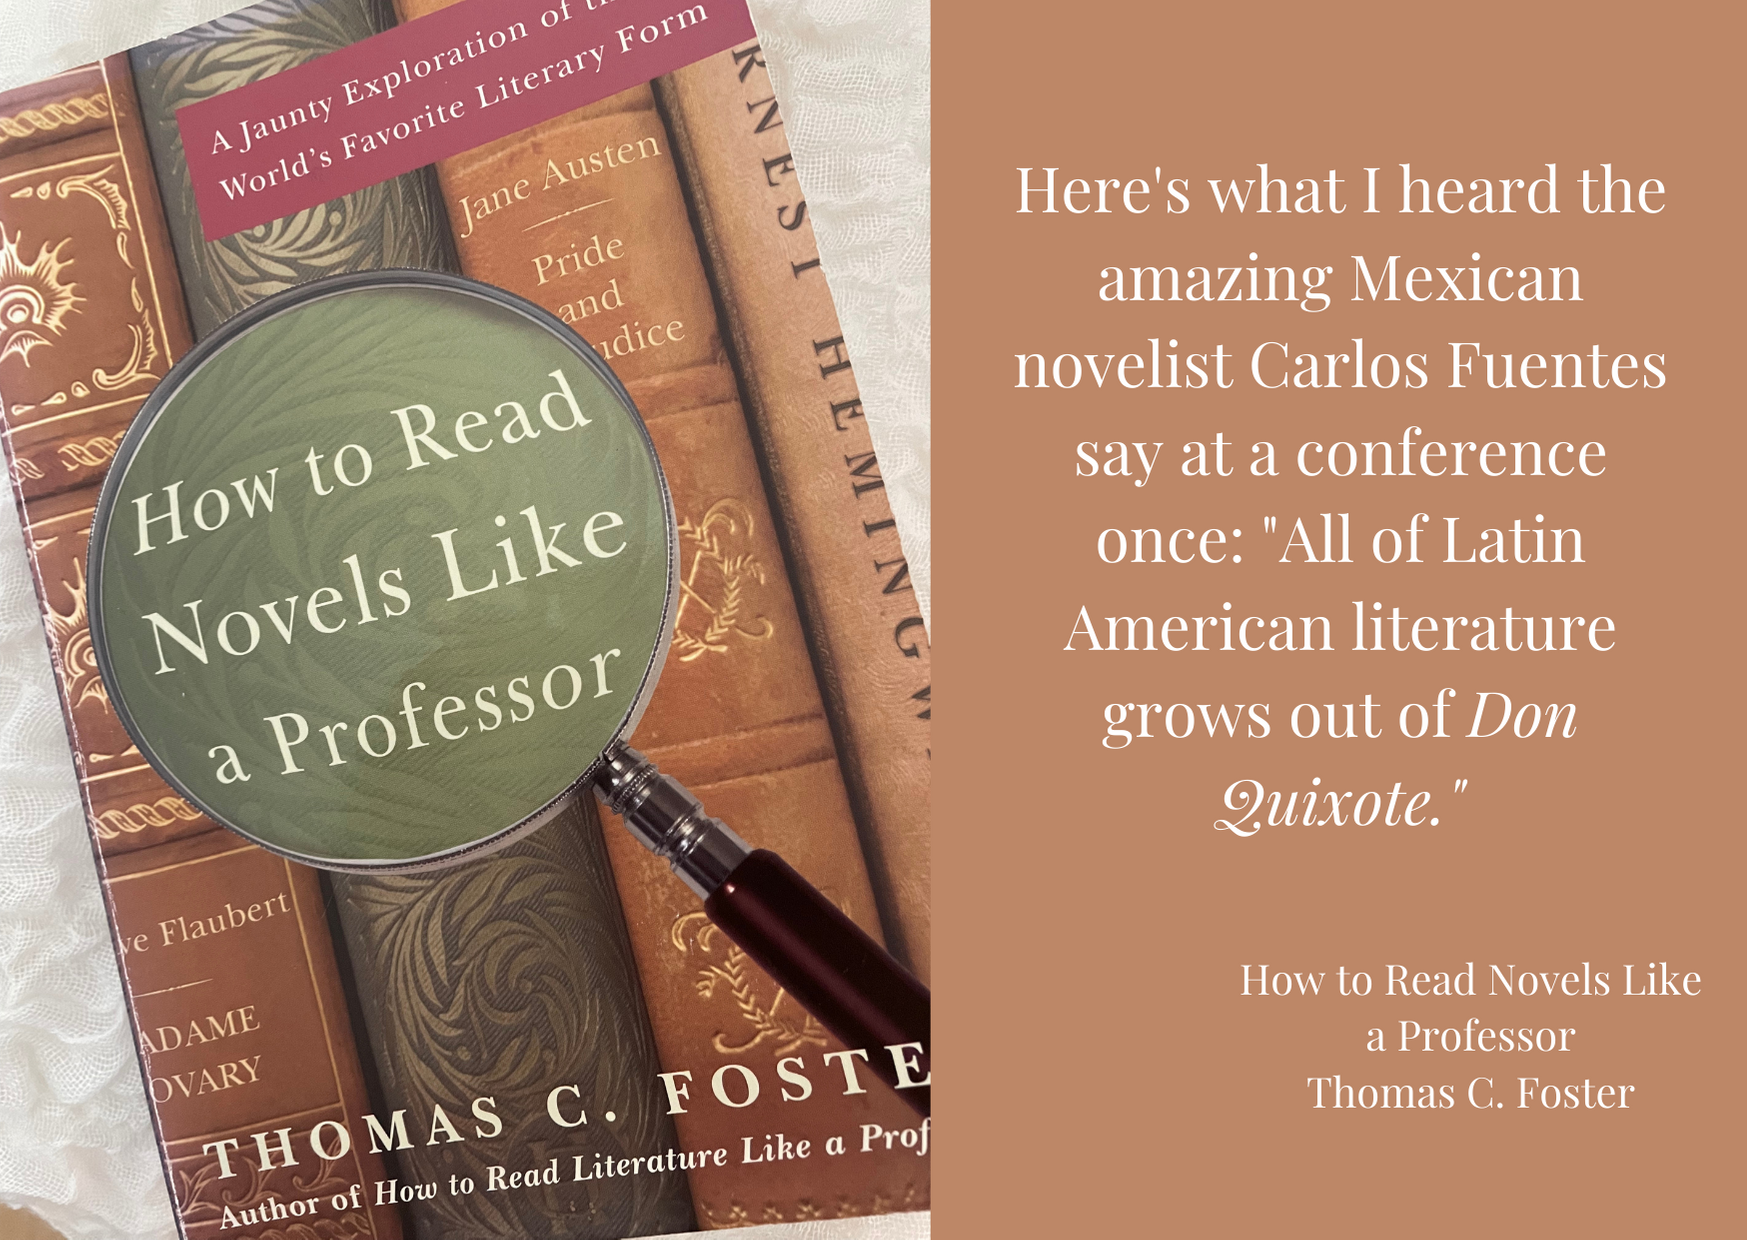 How To Read Novels Like A Professor by Thomas C. Foster